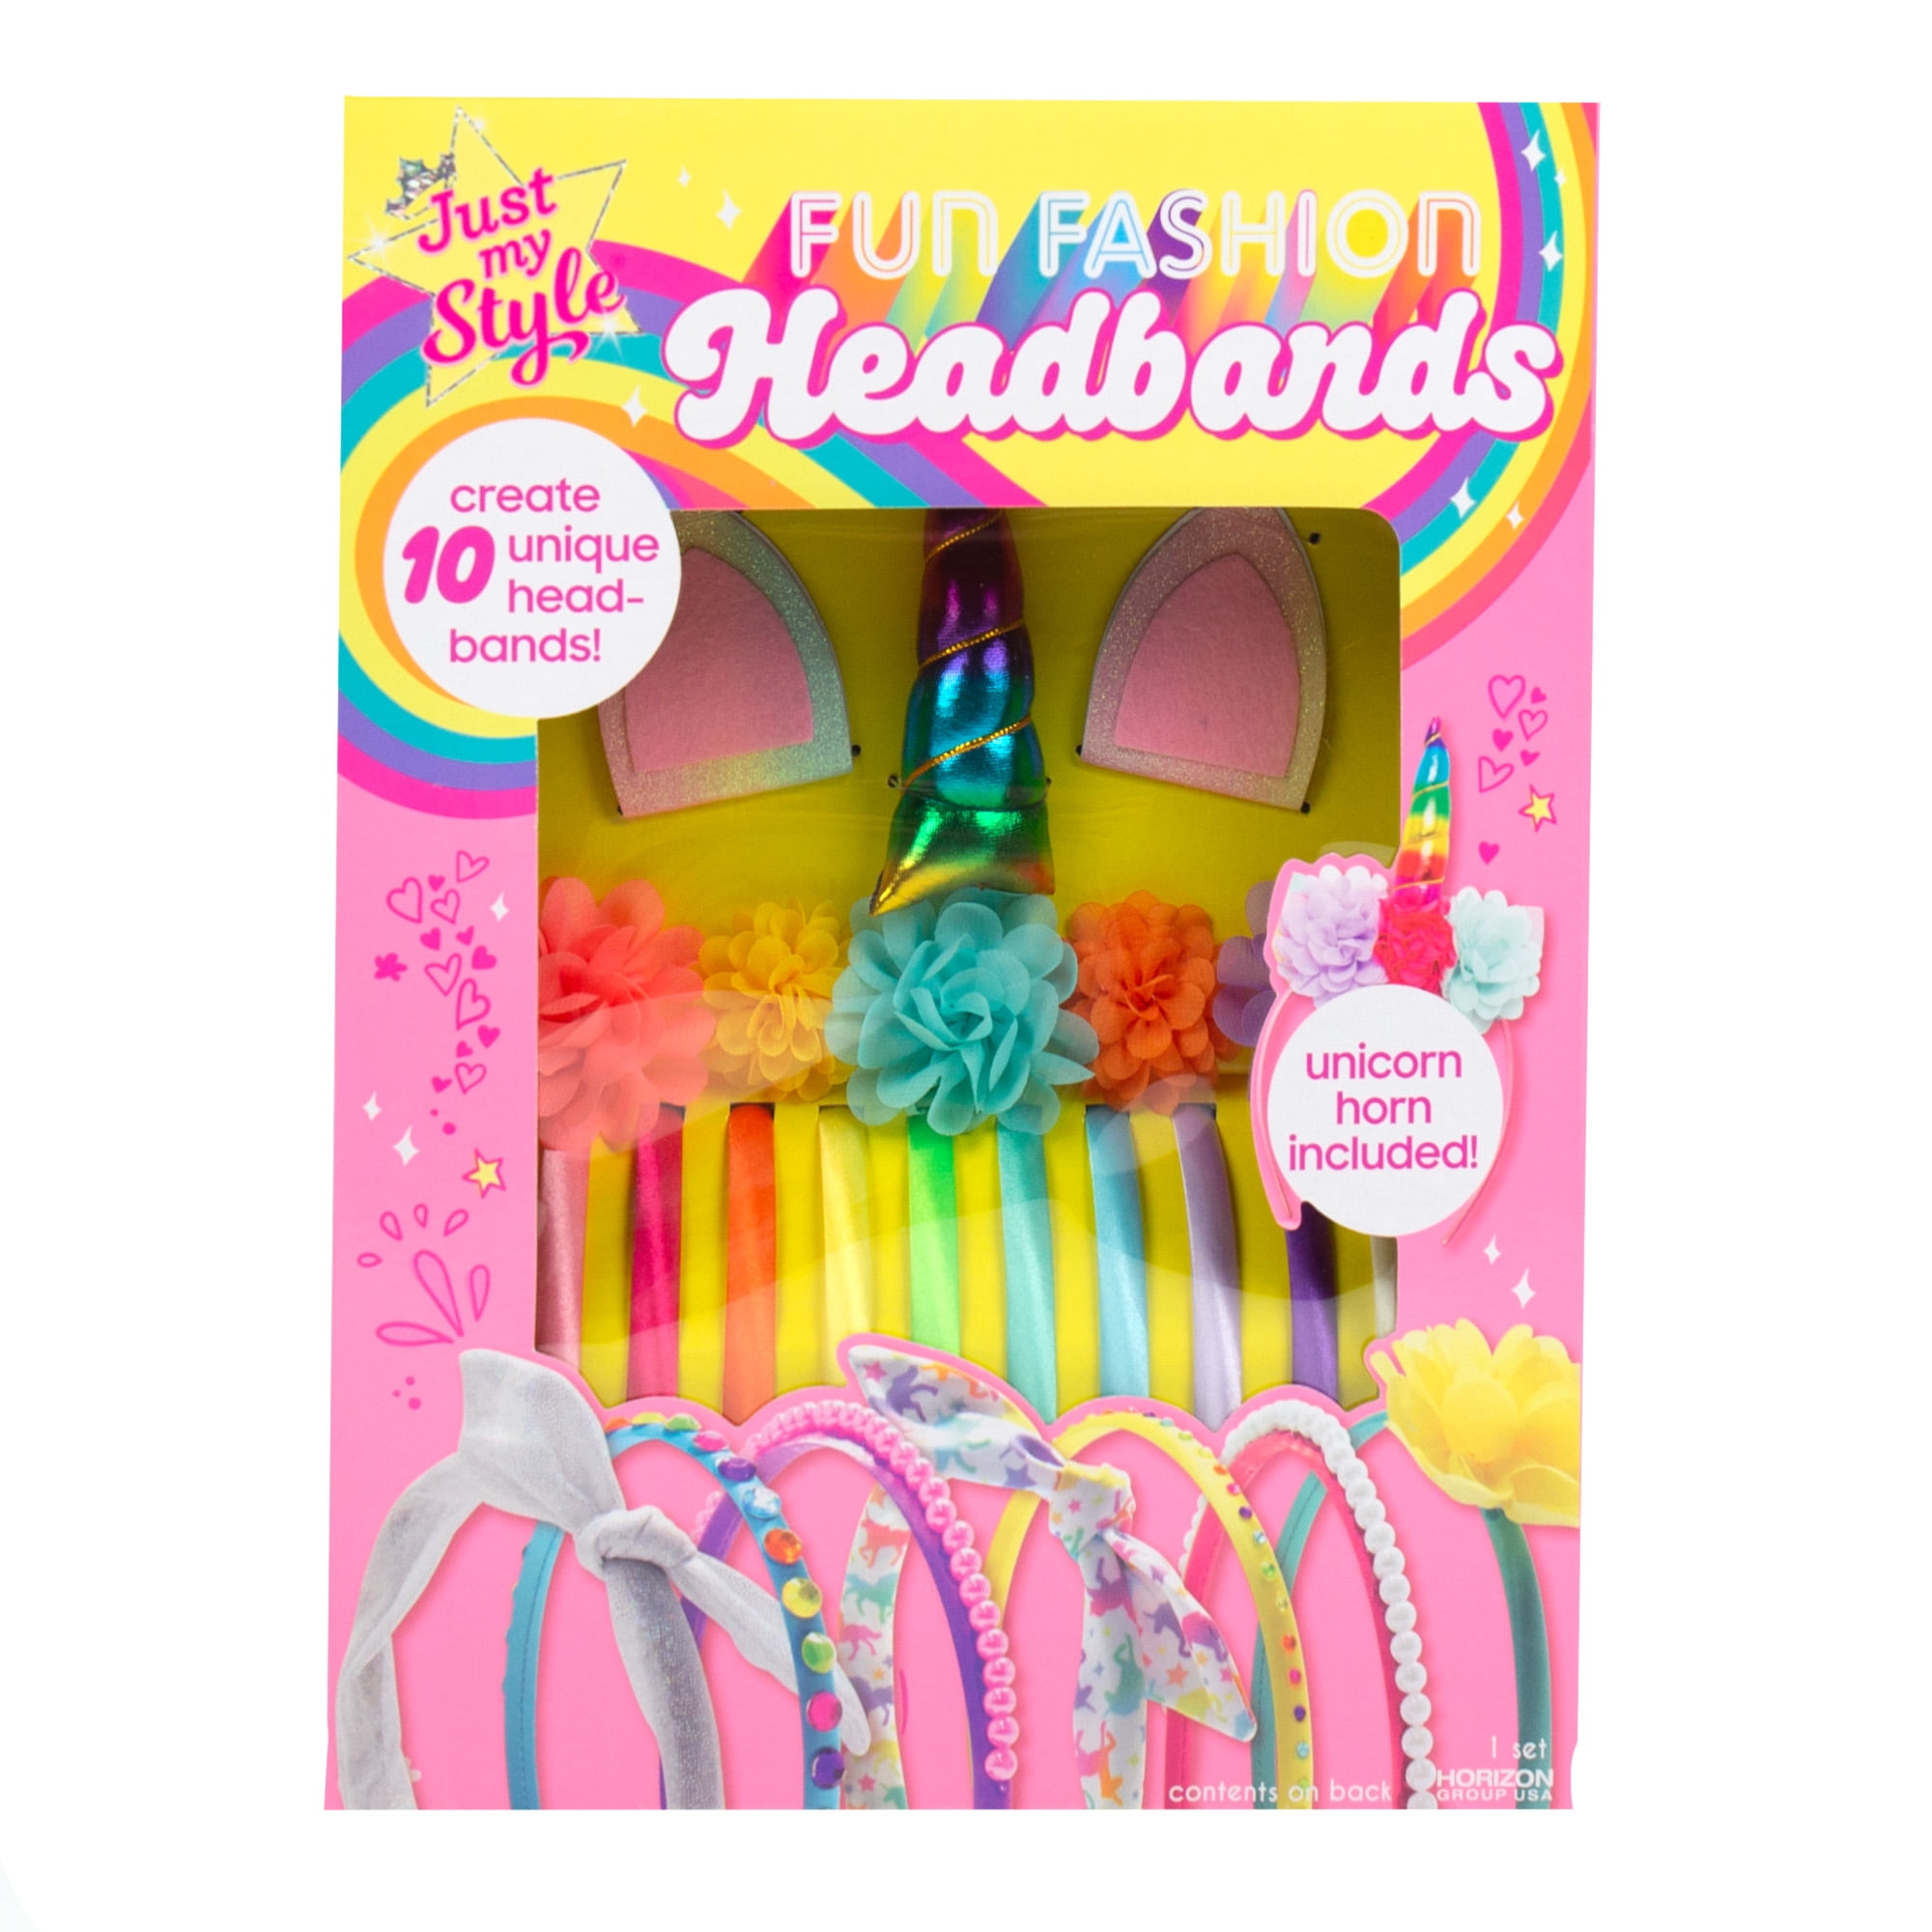 Just My Style Fun Fashion Headbands Art & Craft Kit – Coupon with